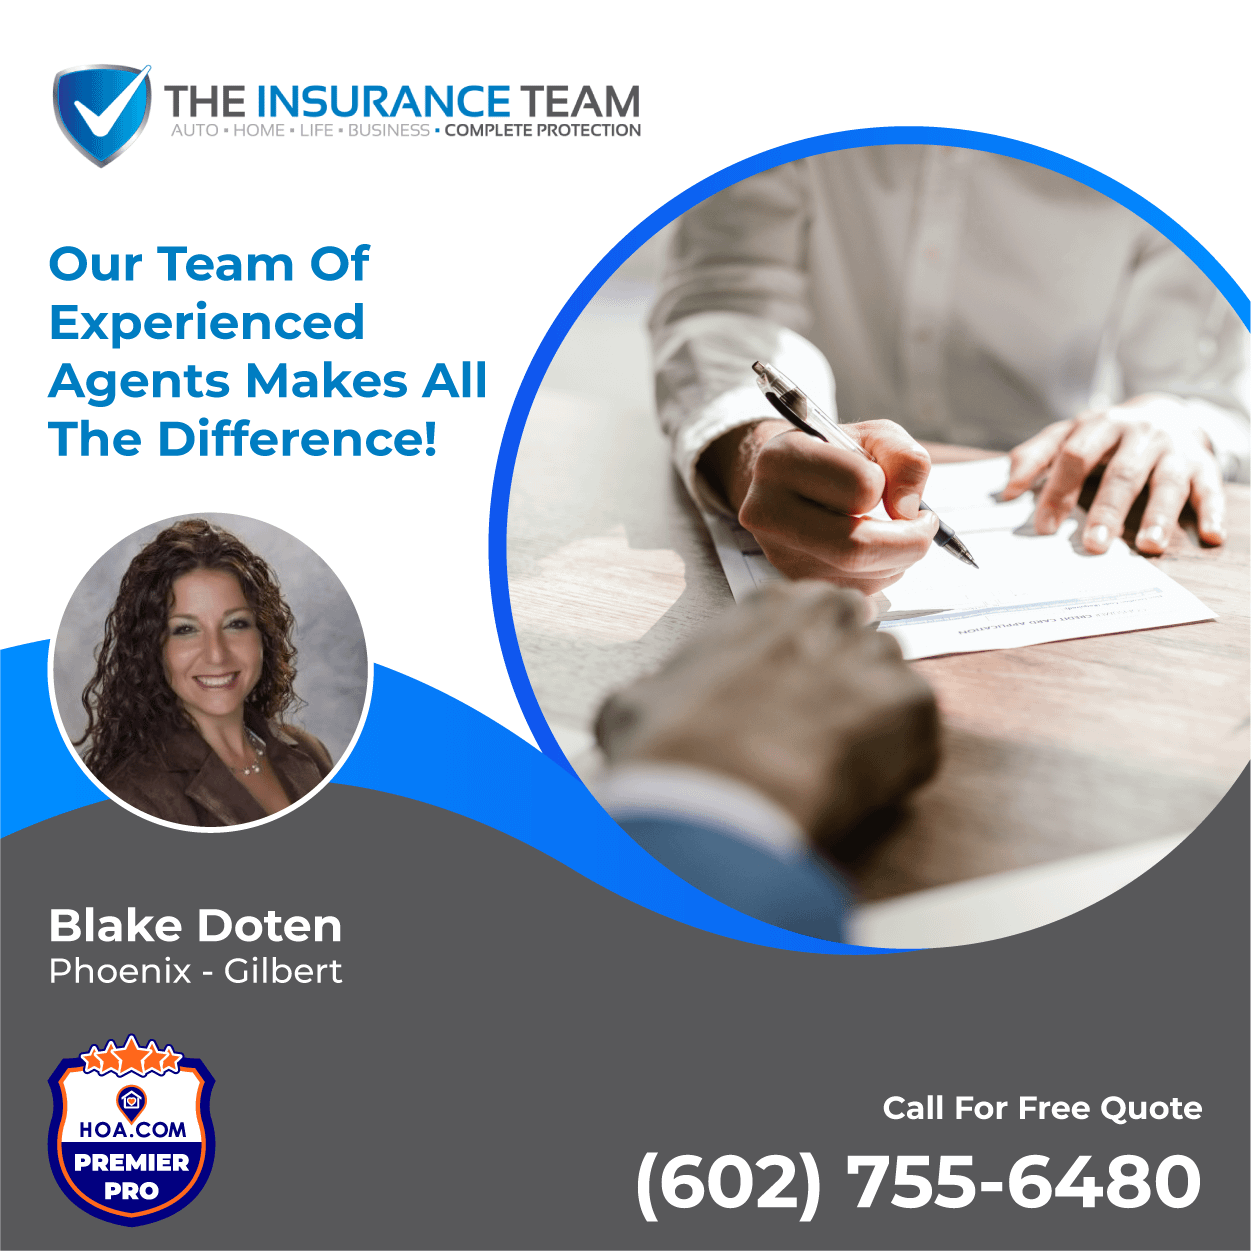 A Team of Experts Makes all the Difference!